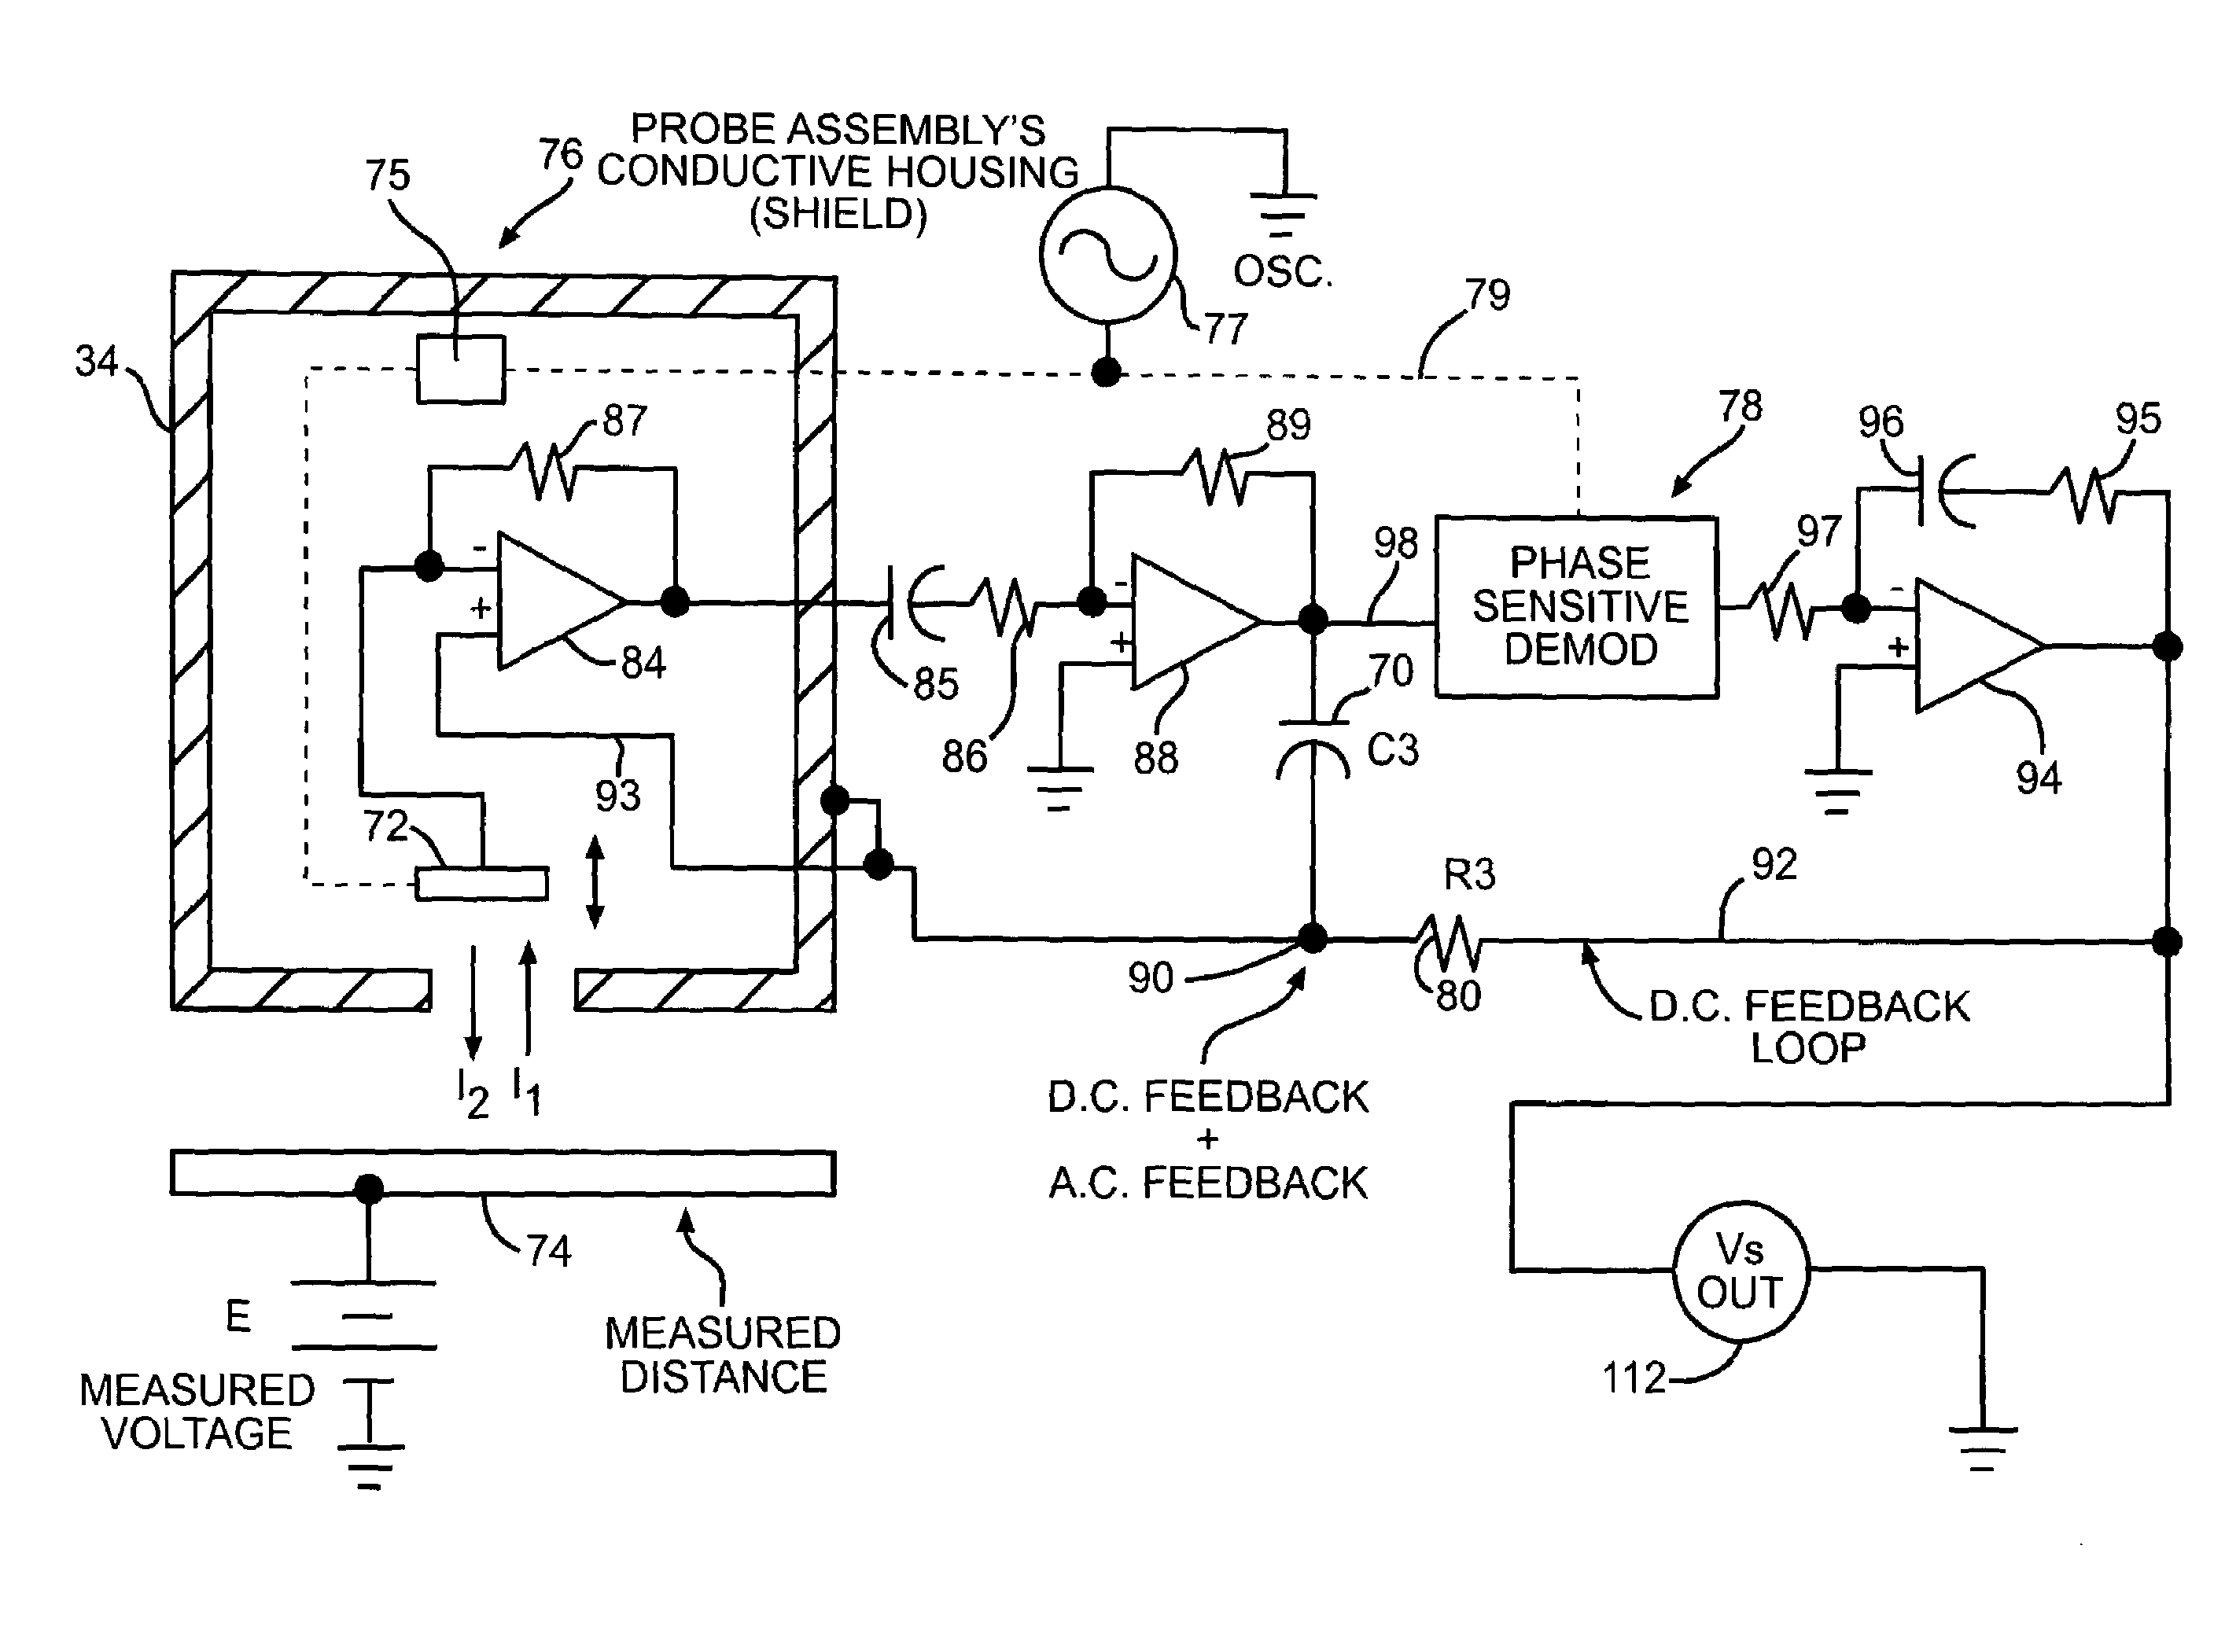 Electrostatic Voltmeter With Spacing-Independent Speed of Response